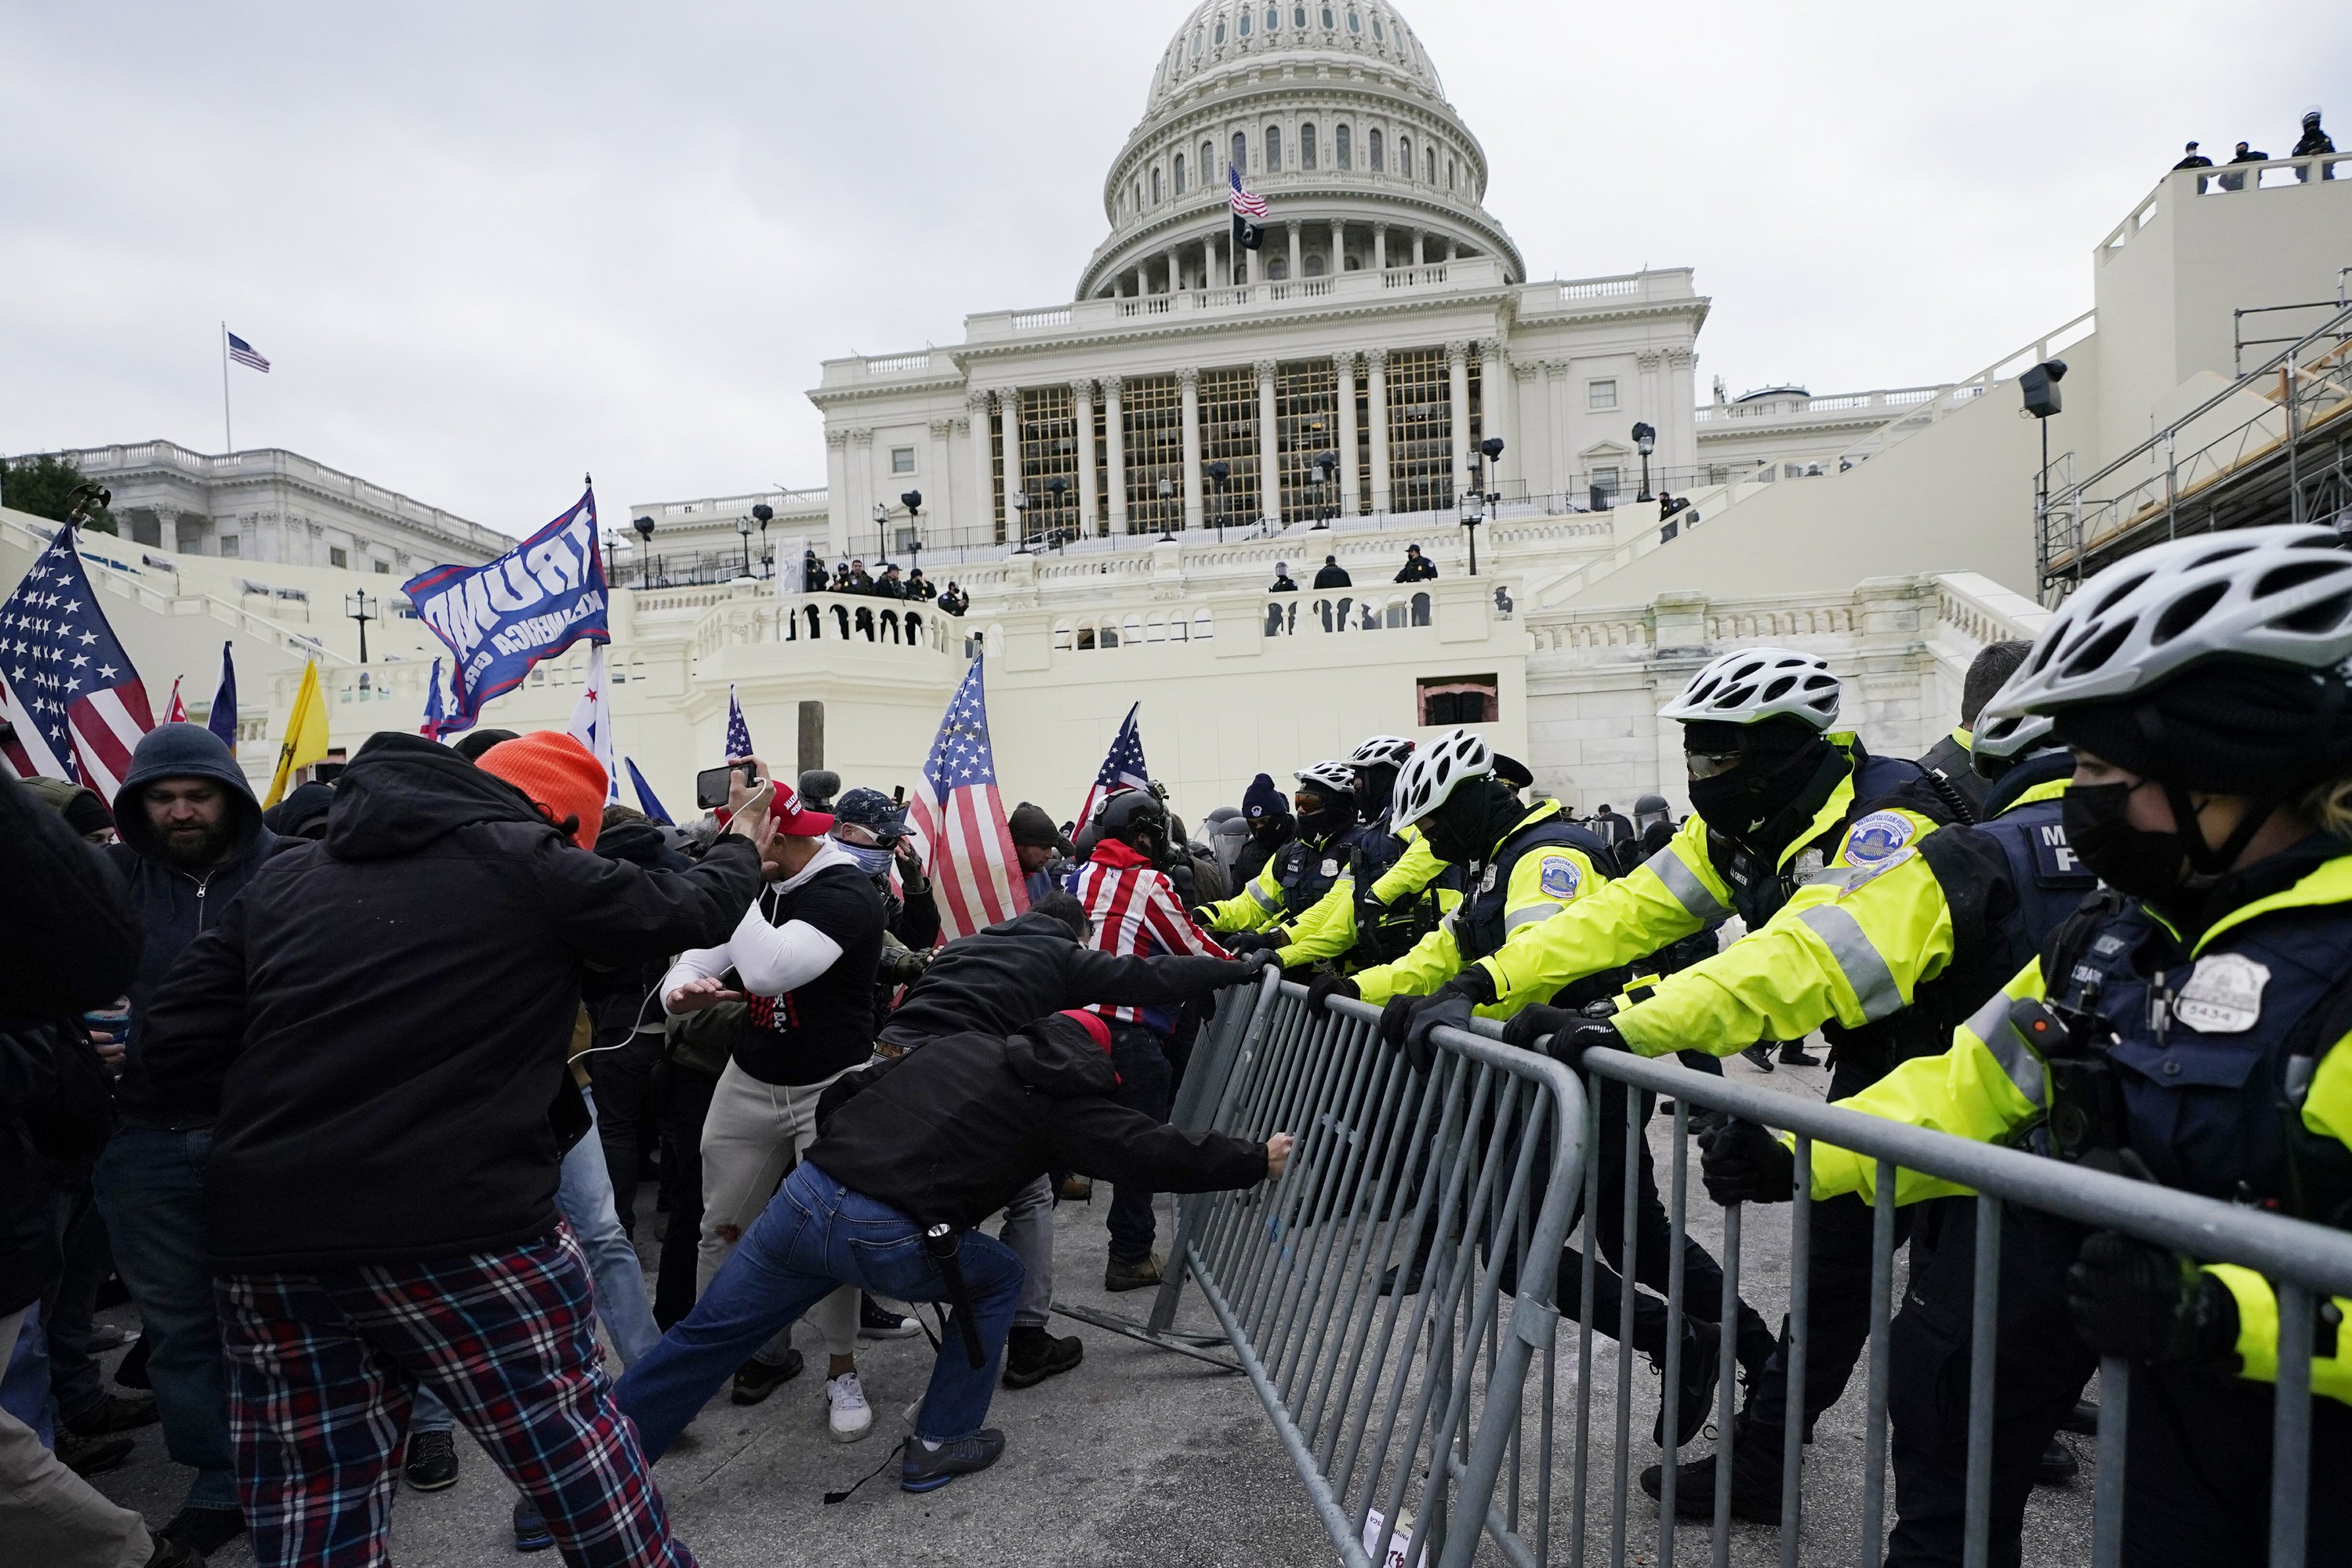 Trump supporters invade U.S. Capitol and face police